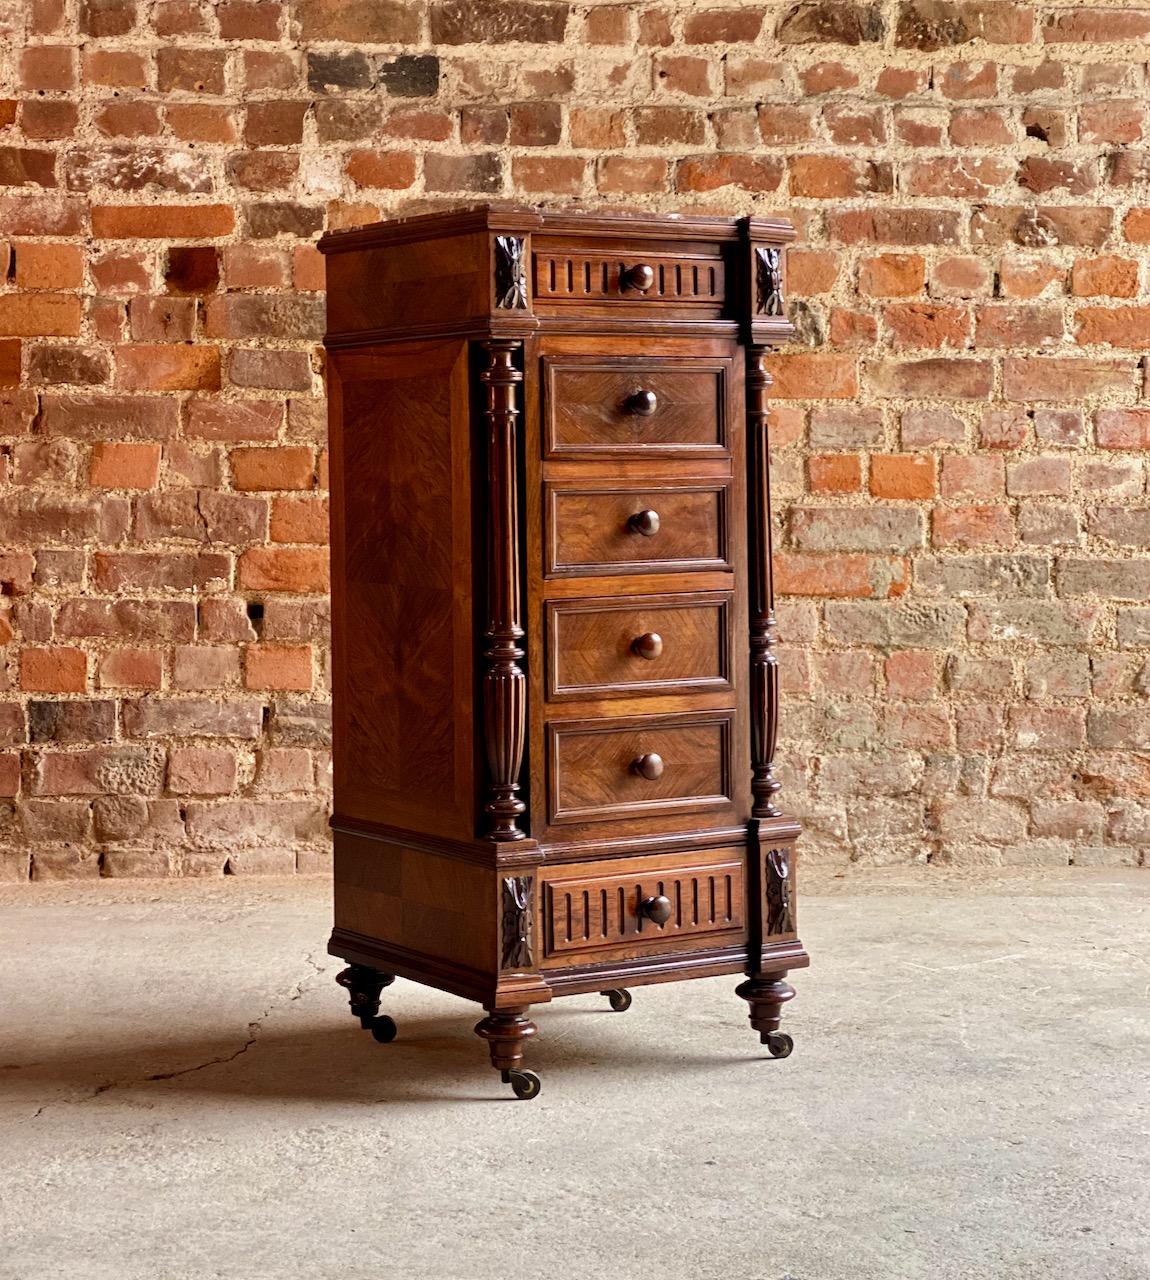 Antique French walnut nightstand bedside table side cabinet marble 1890

This is a 19th century French marble topped Walnut bedside cabinet or nightstand dating to circa 1890, the wonderful mellow tones of the Walnut with a breakfront design with